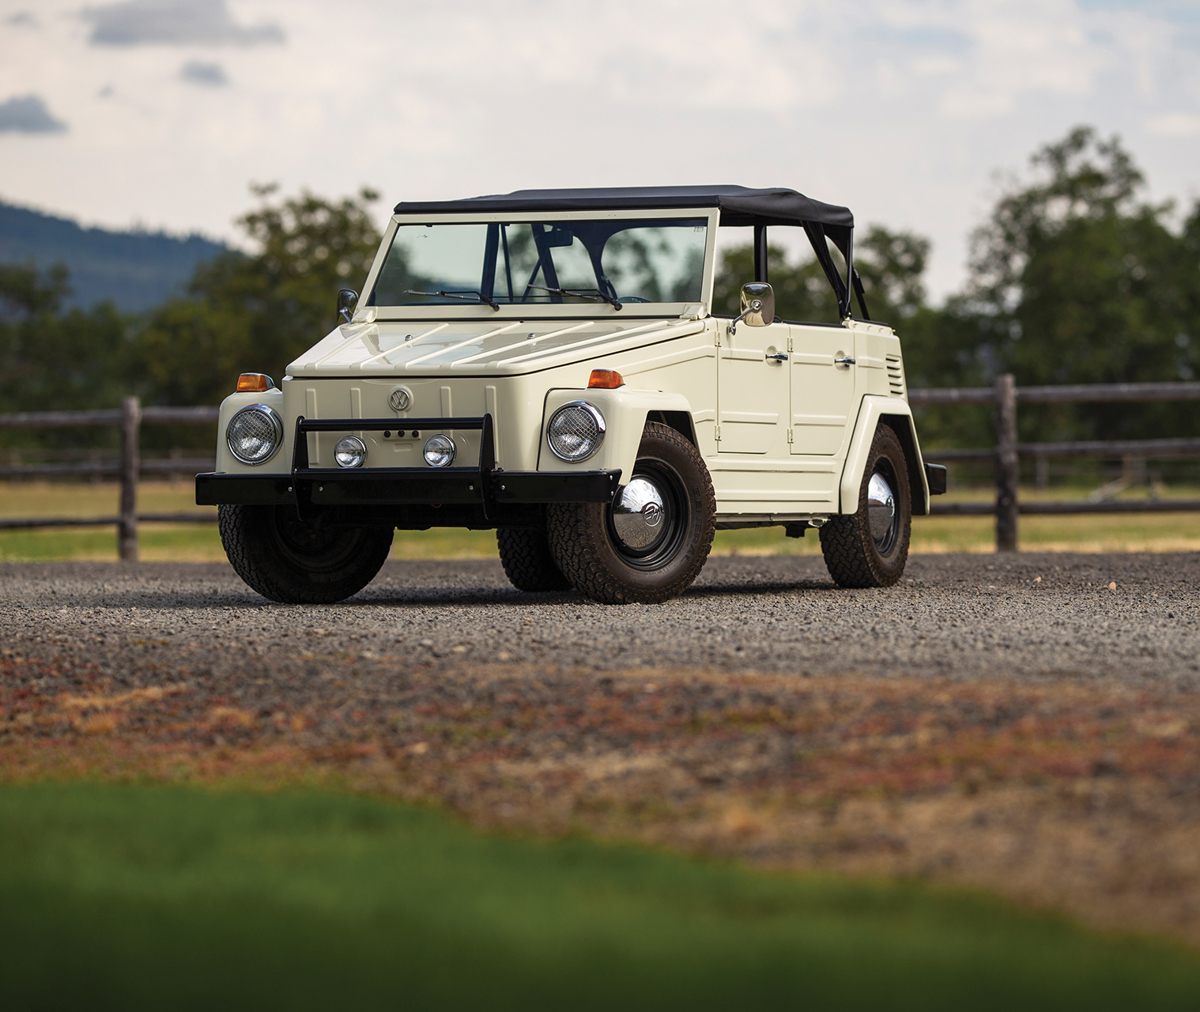 1973 Volkswagen Type 181 Thing offered at RM Sotheby’s Monterey live auction 2019